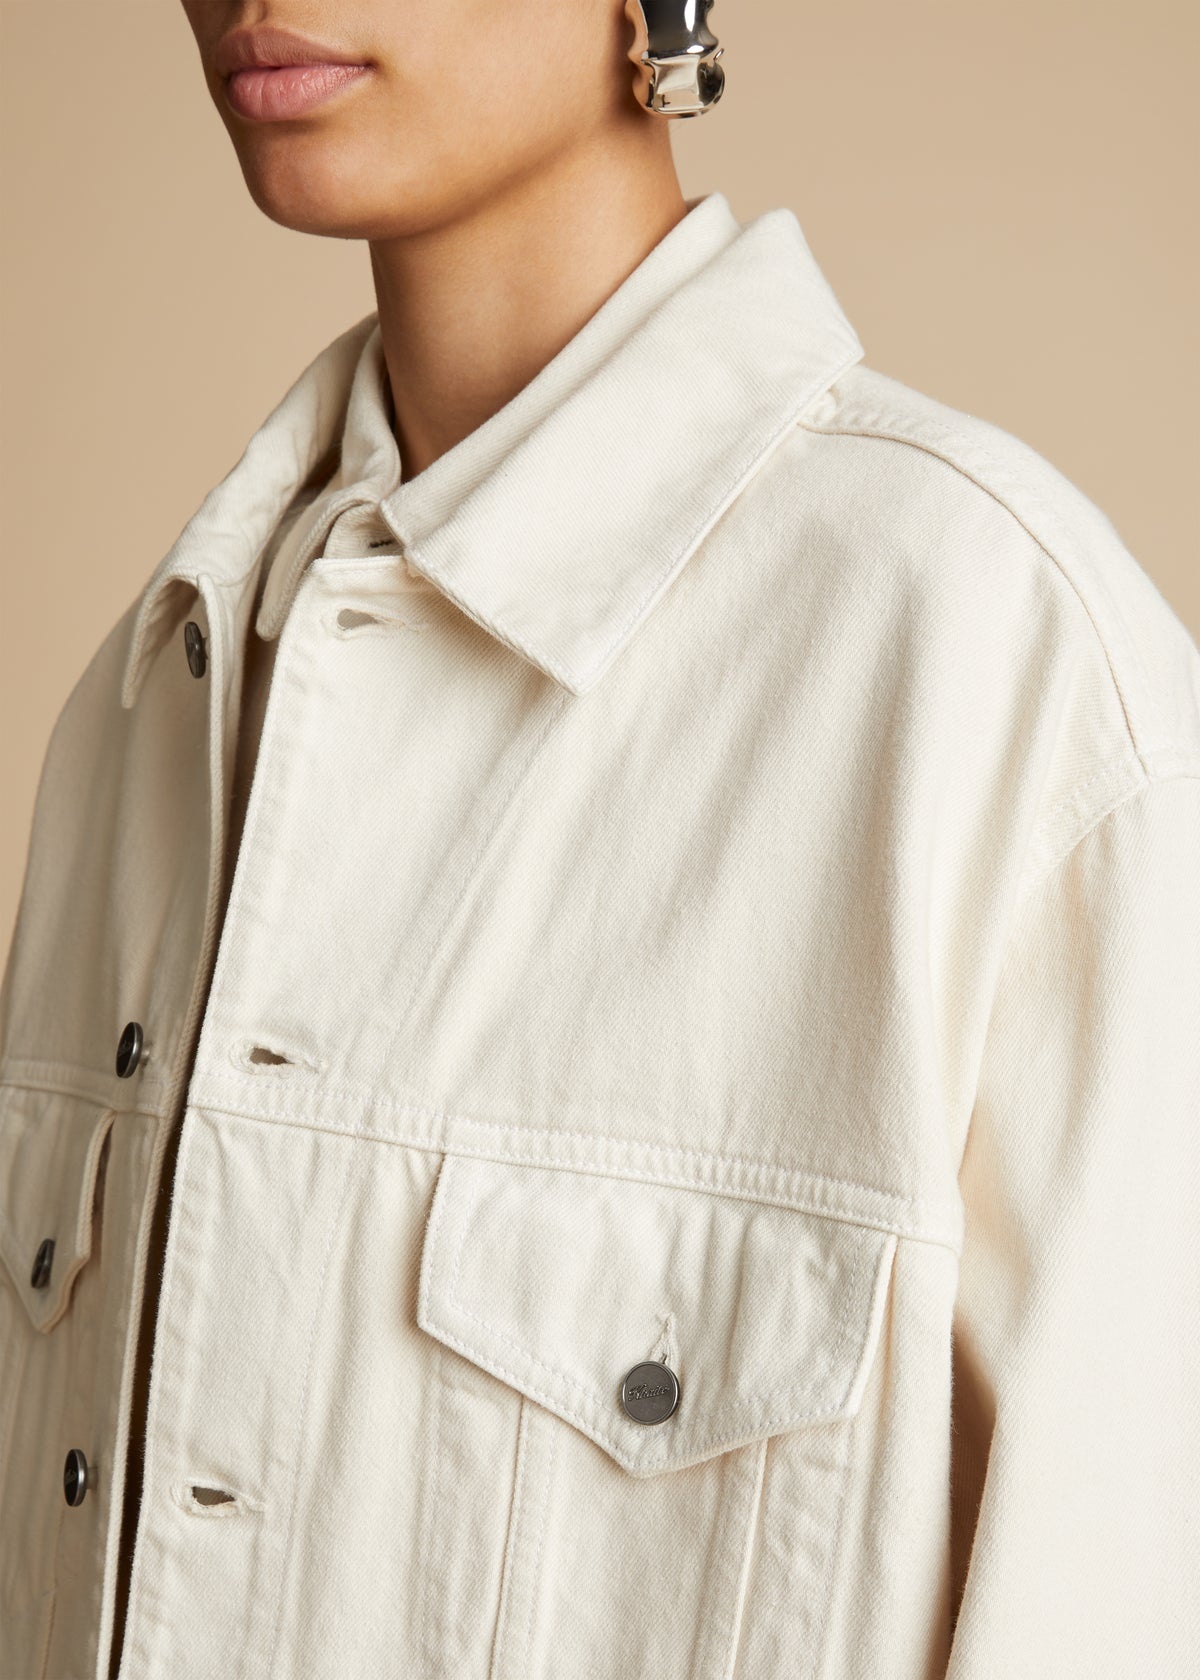 The Grizzo Jacket in Ivory - 4